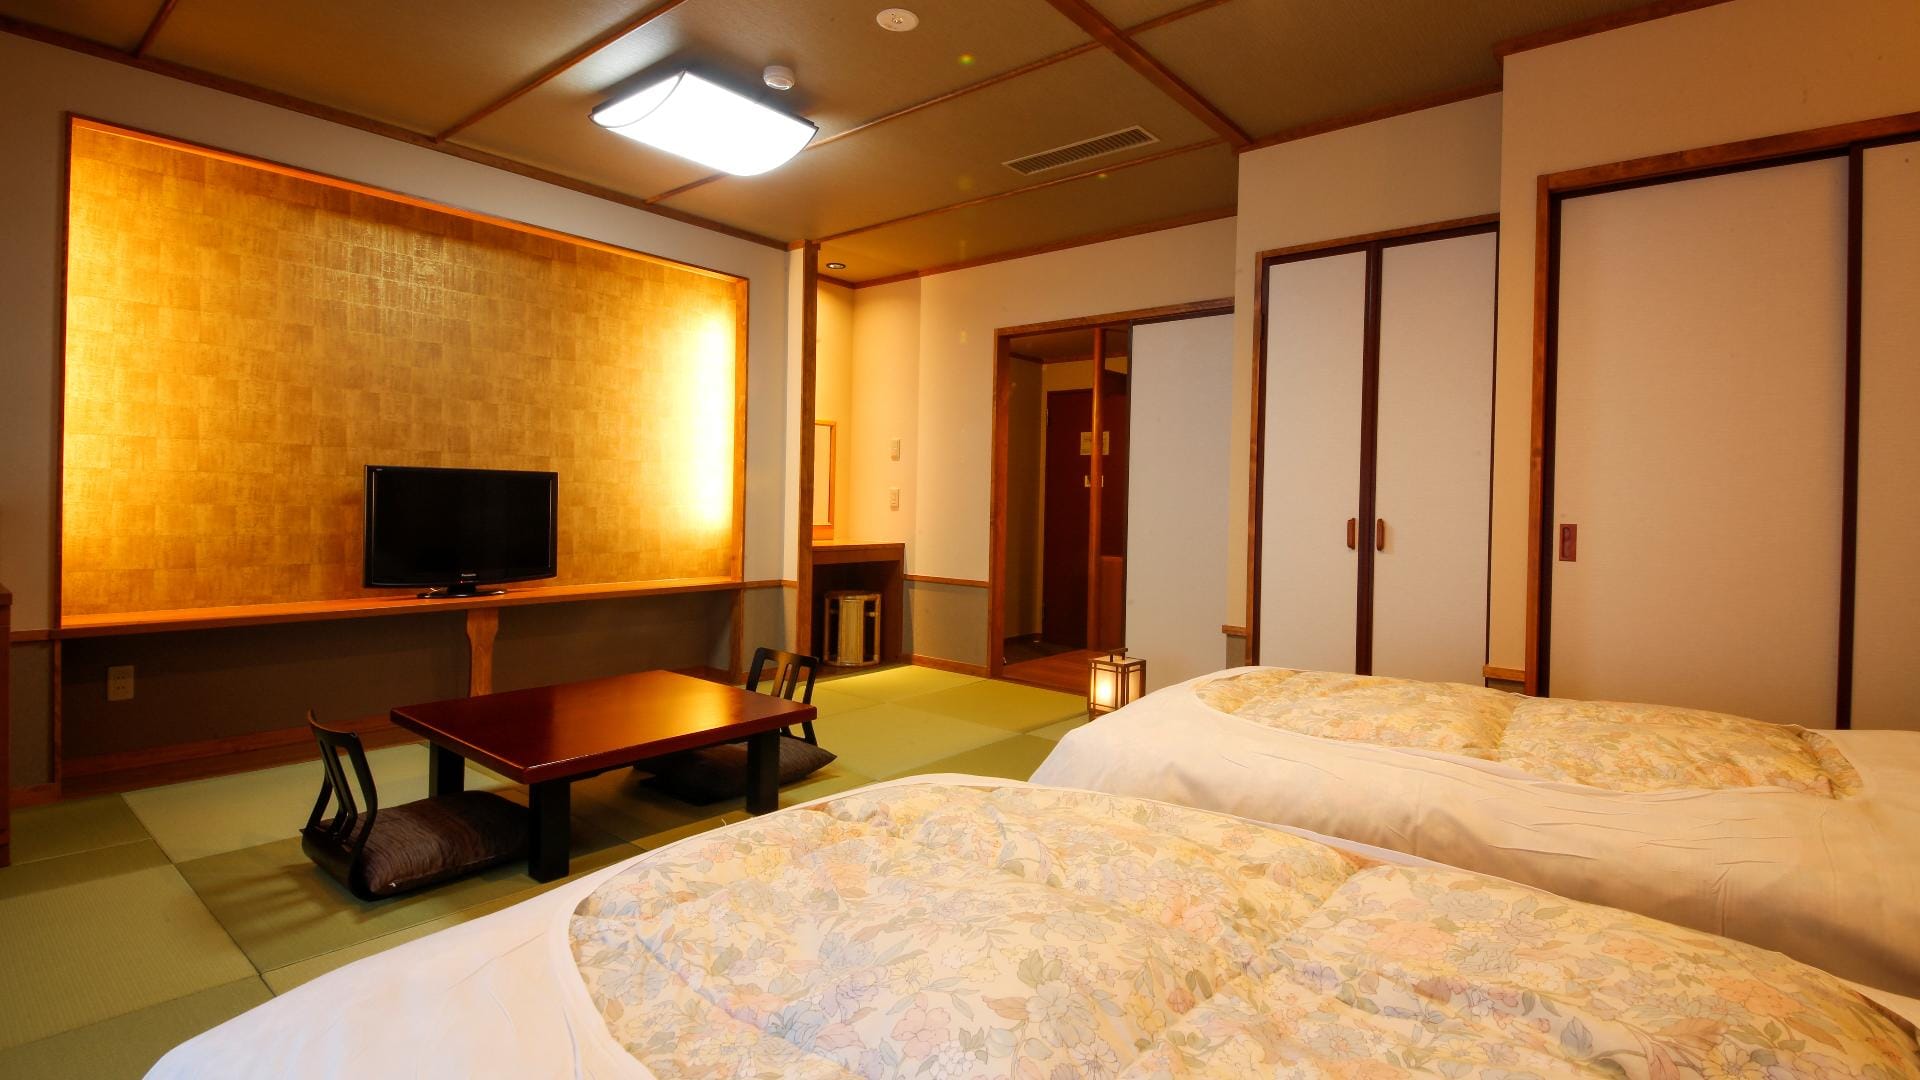 ■ Japanese and Western rooms at different angles